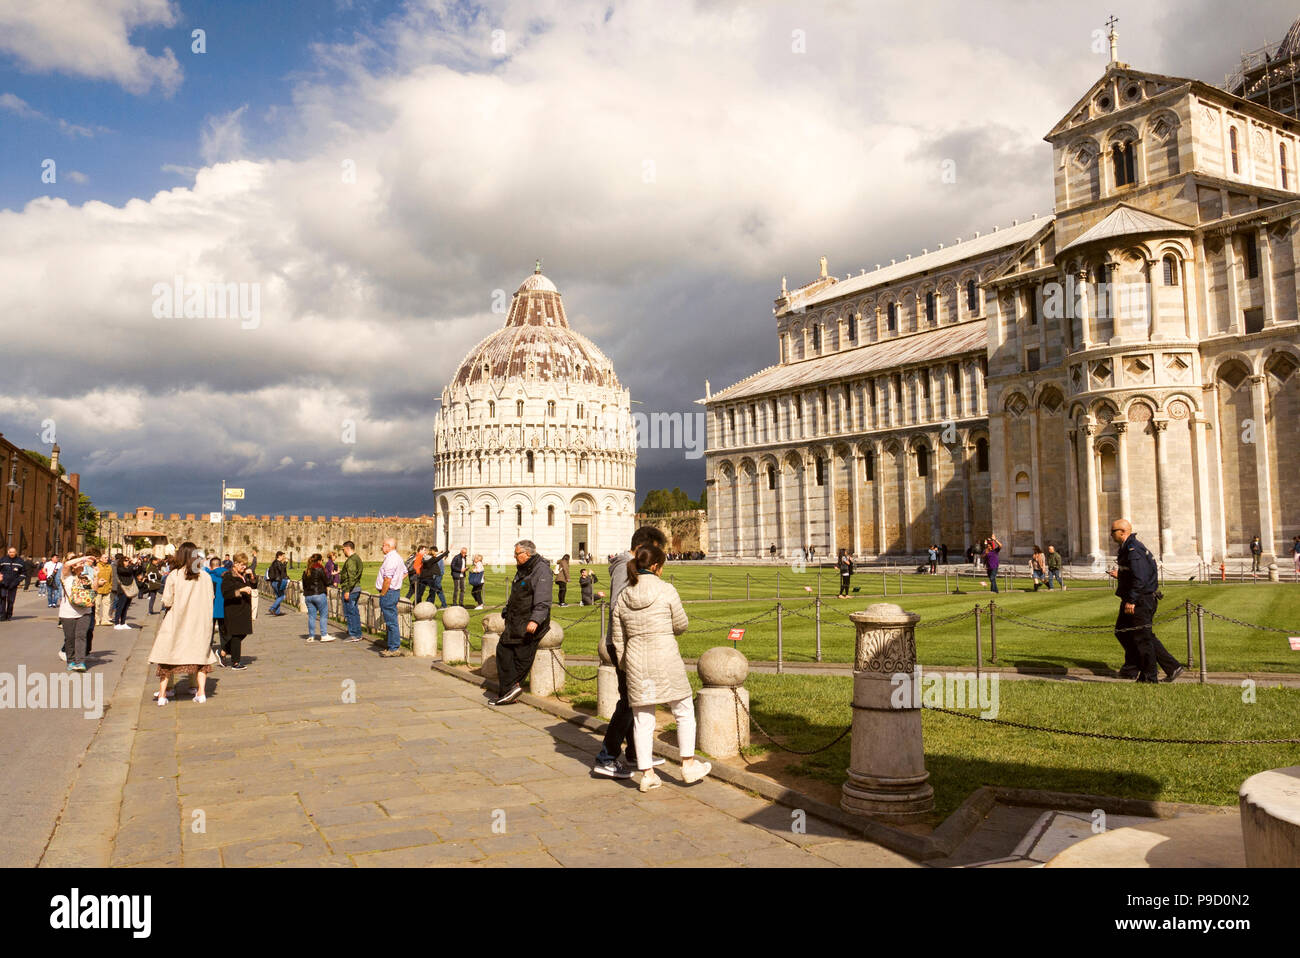 The Pisa Baptistery of St. John and Pisa Cathedral. Grand marble-striped cathedral known for its ornate Romanesque bronze doors & carved 1300s pulpit. Stock Photo